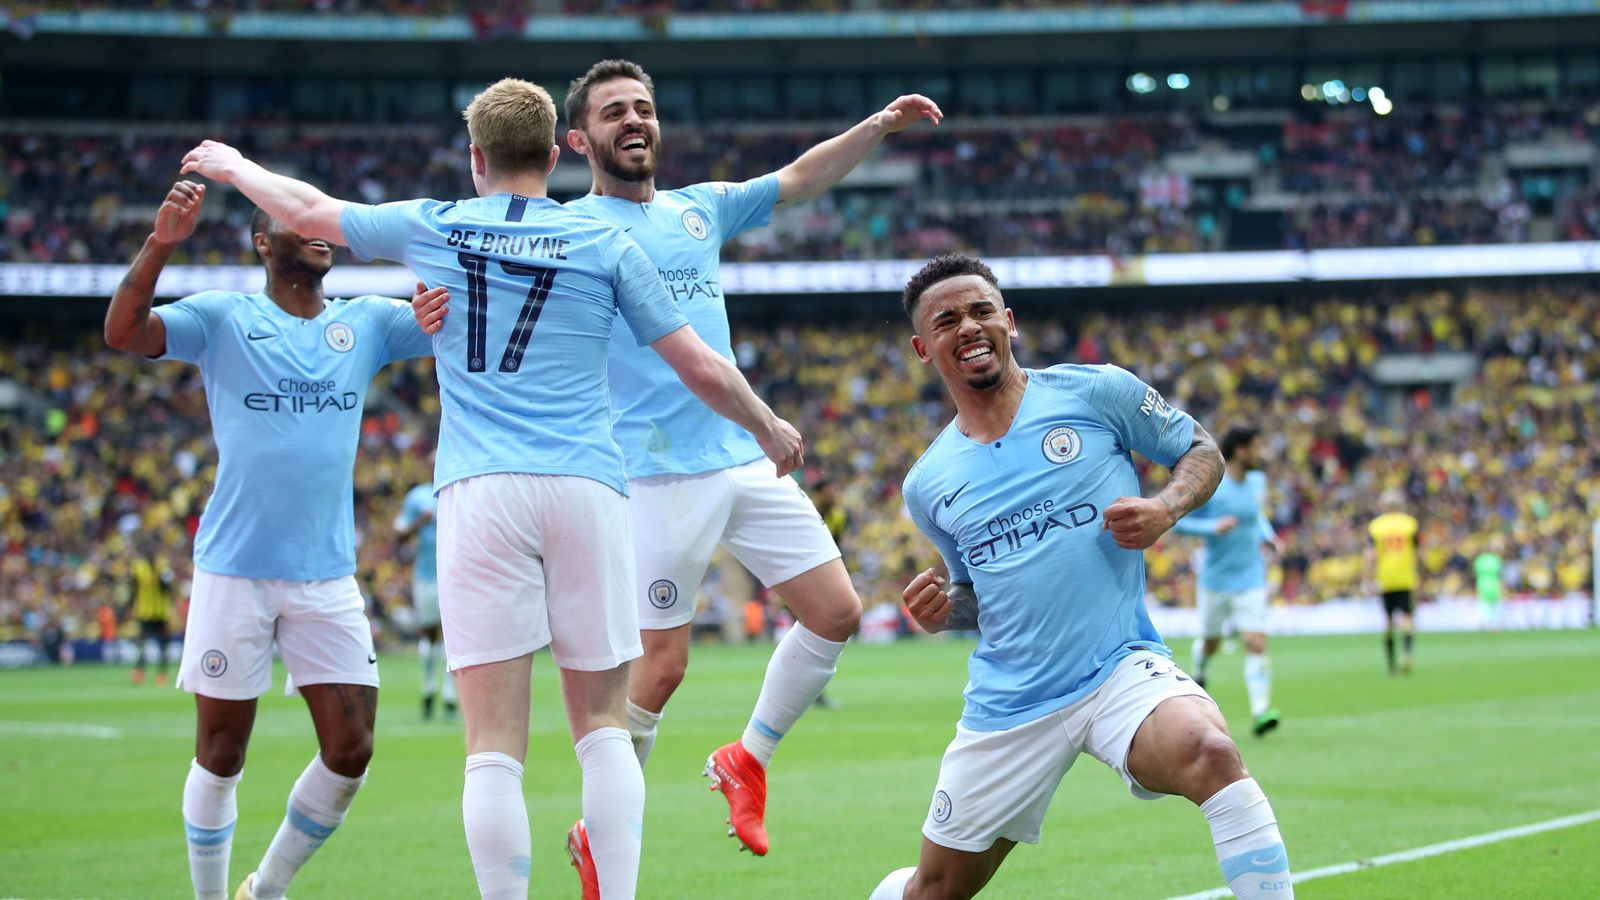 Manchester City's treble shows their dominance and it will not stop now | Football News | Sky Sports